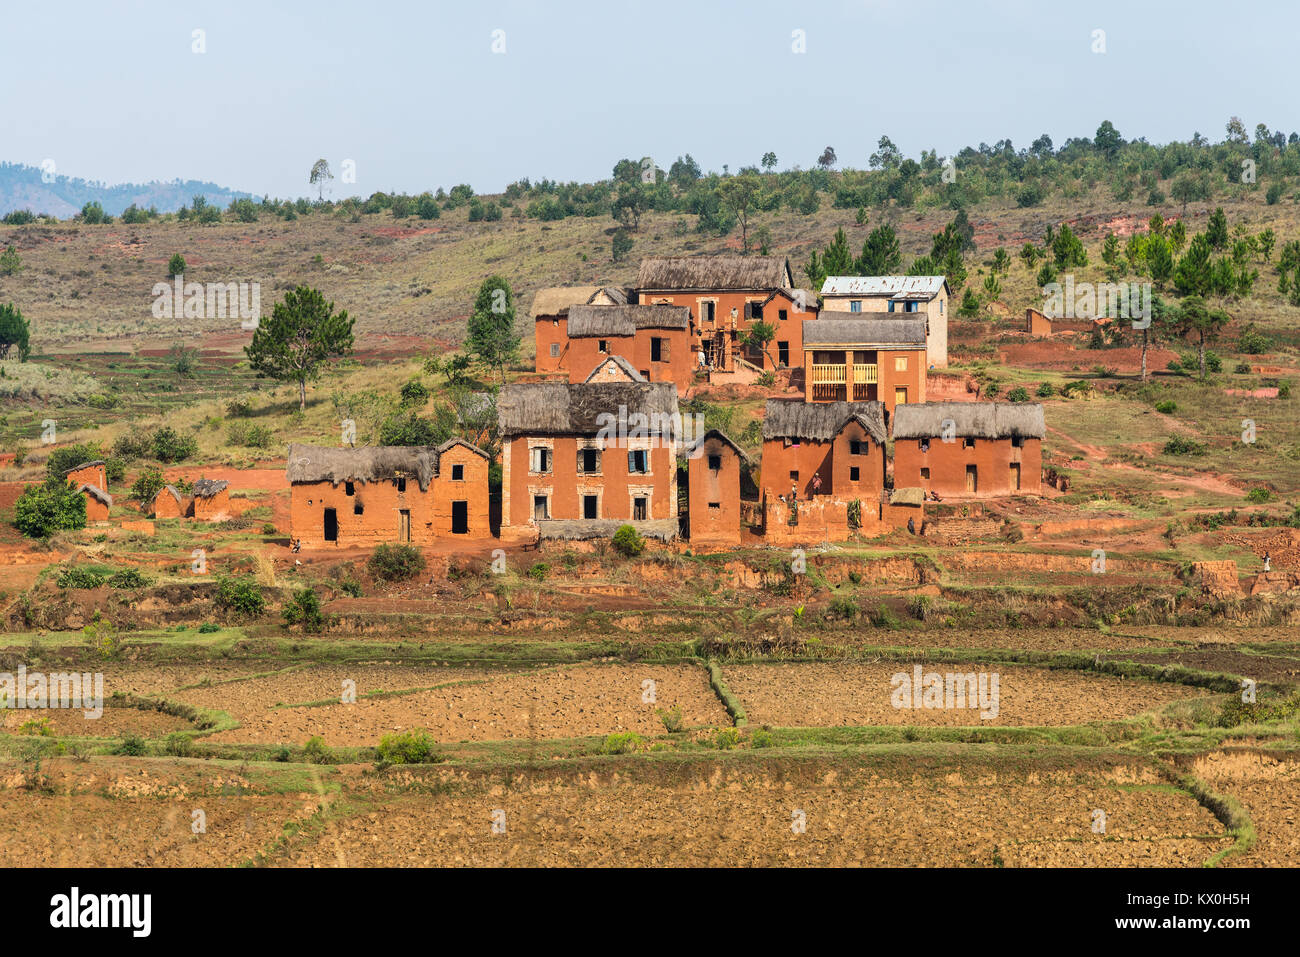 Typical local houses with colorful clay walls in southeastern Madagascar, Africa. Stock Photo